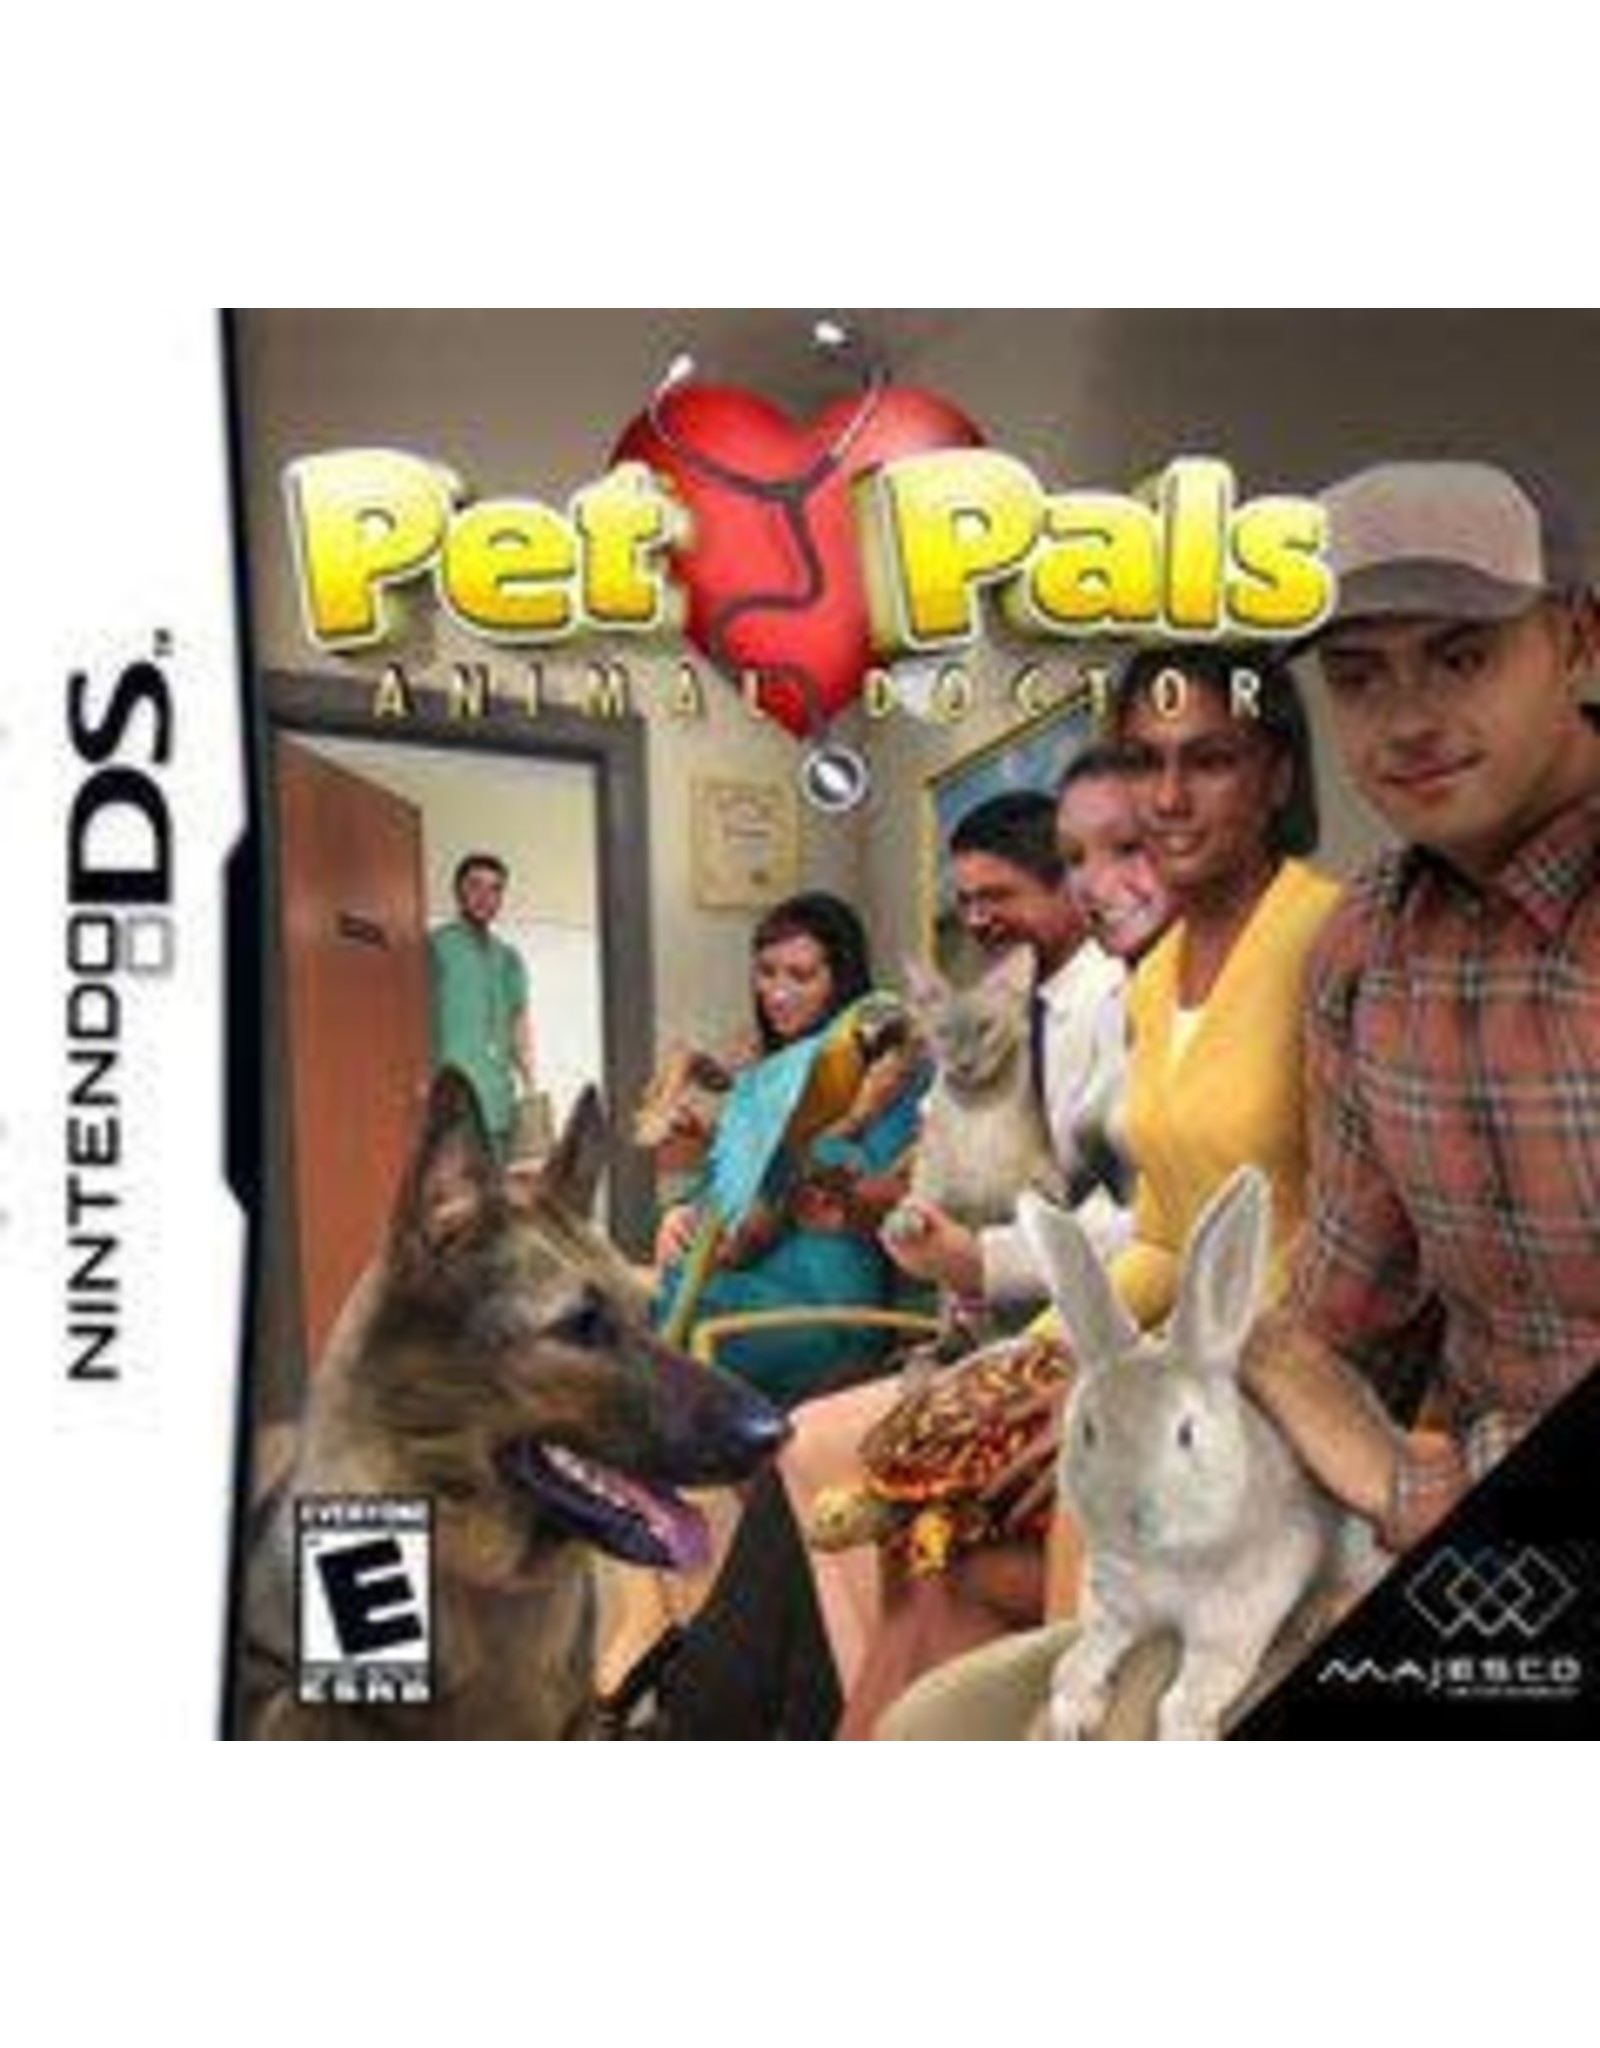 Nintendo DS Pet Pals Animal Doctor (Cart Only)